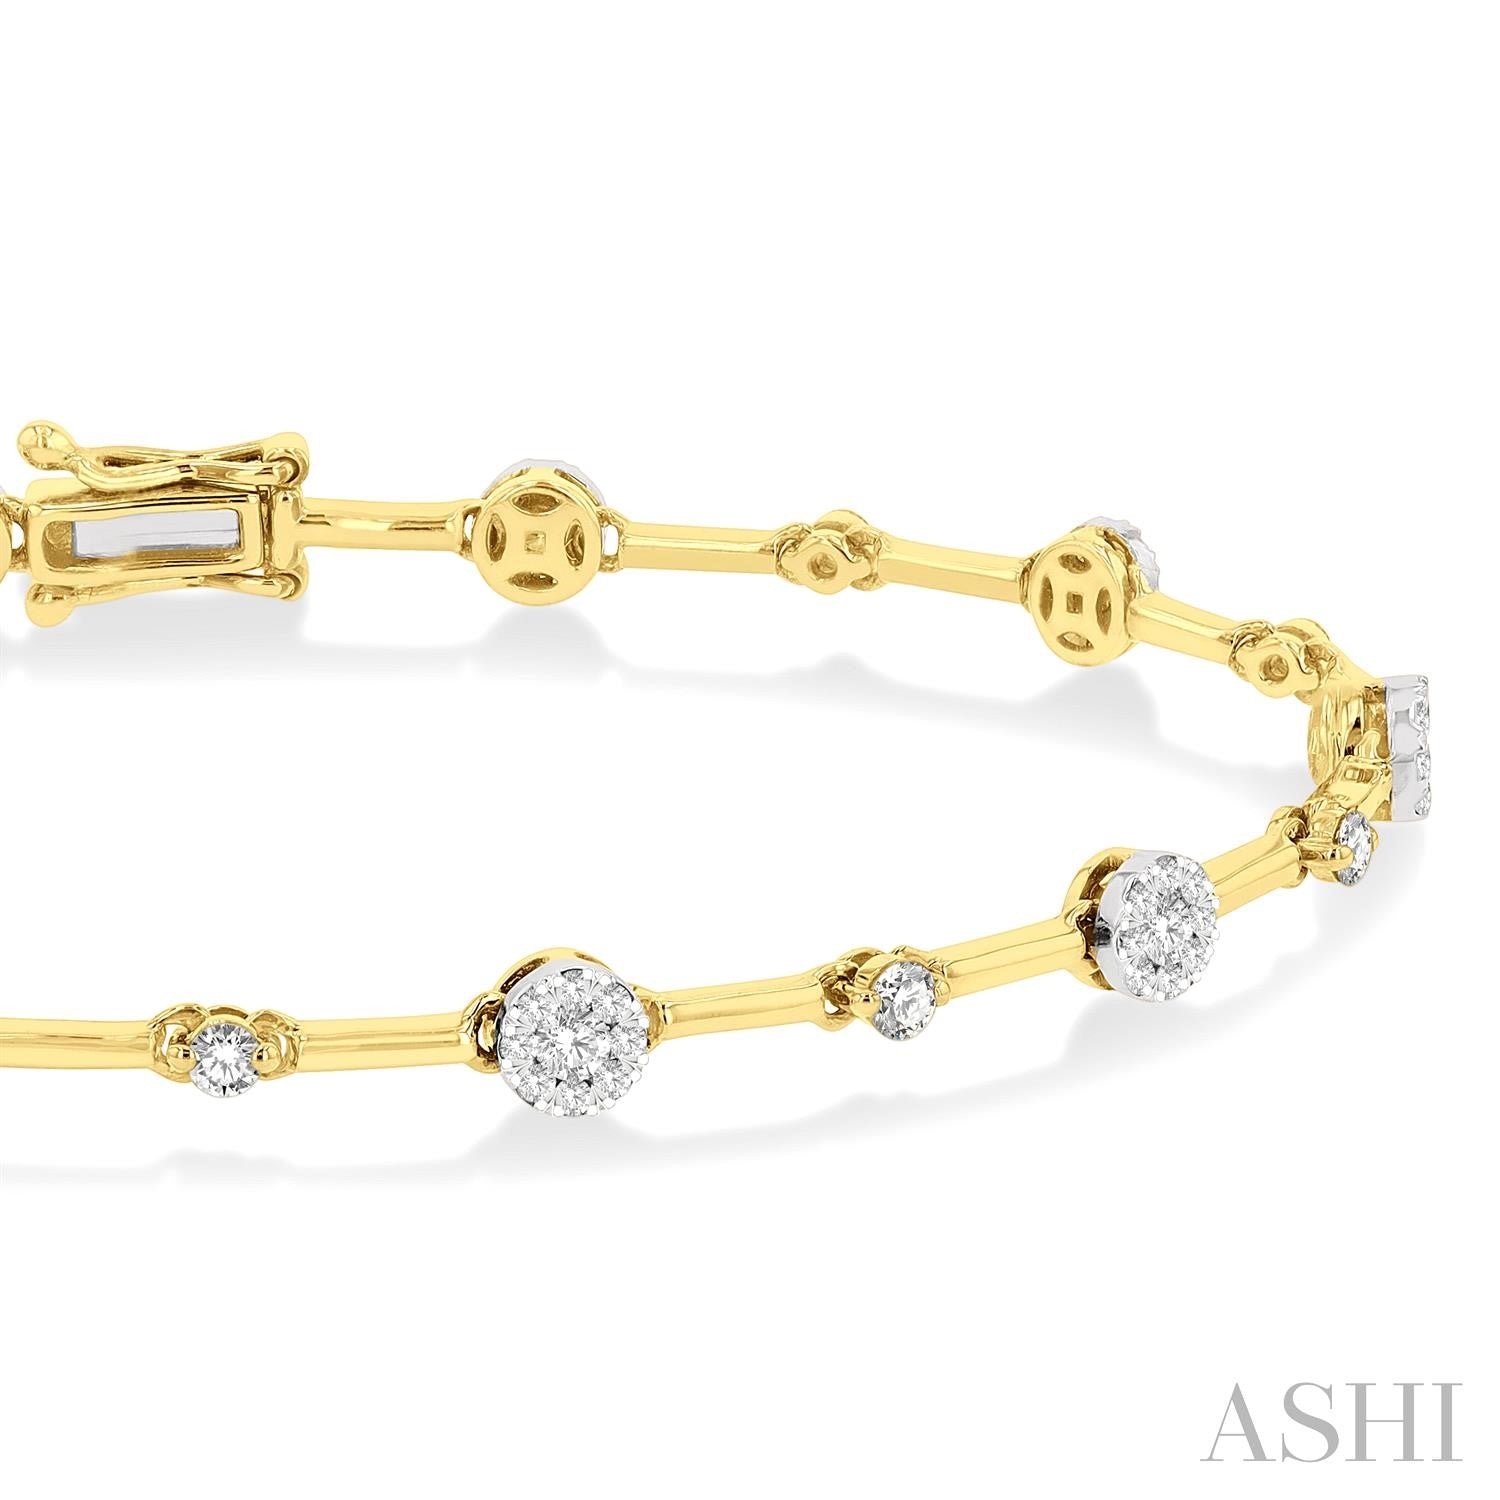 1 ctw Lovebright Round Cut Diamond Bar Bracelet in 14K Yellow and White Gold